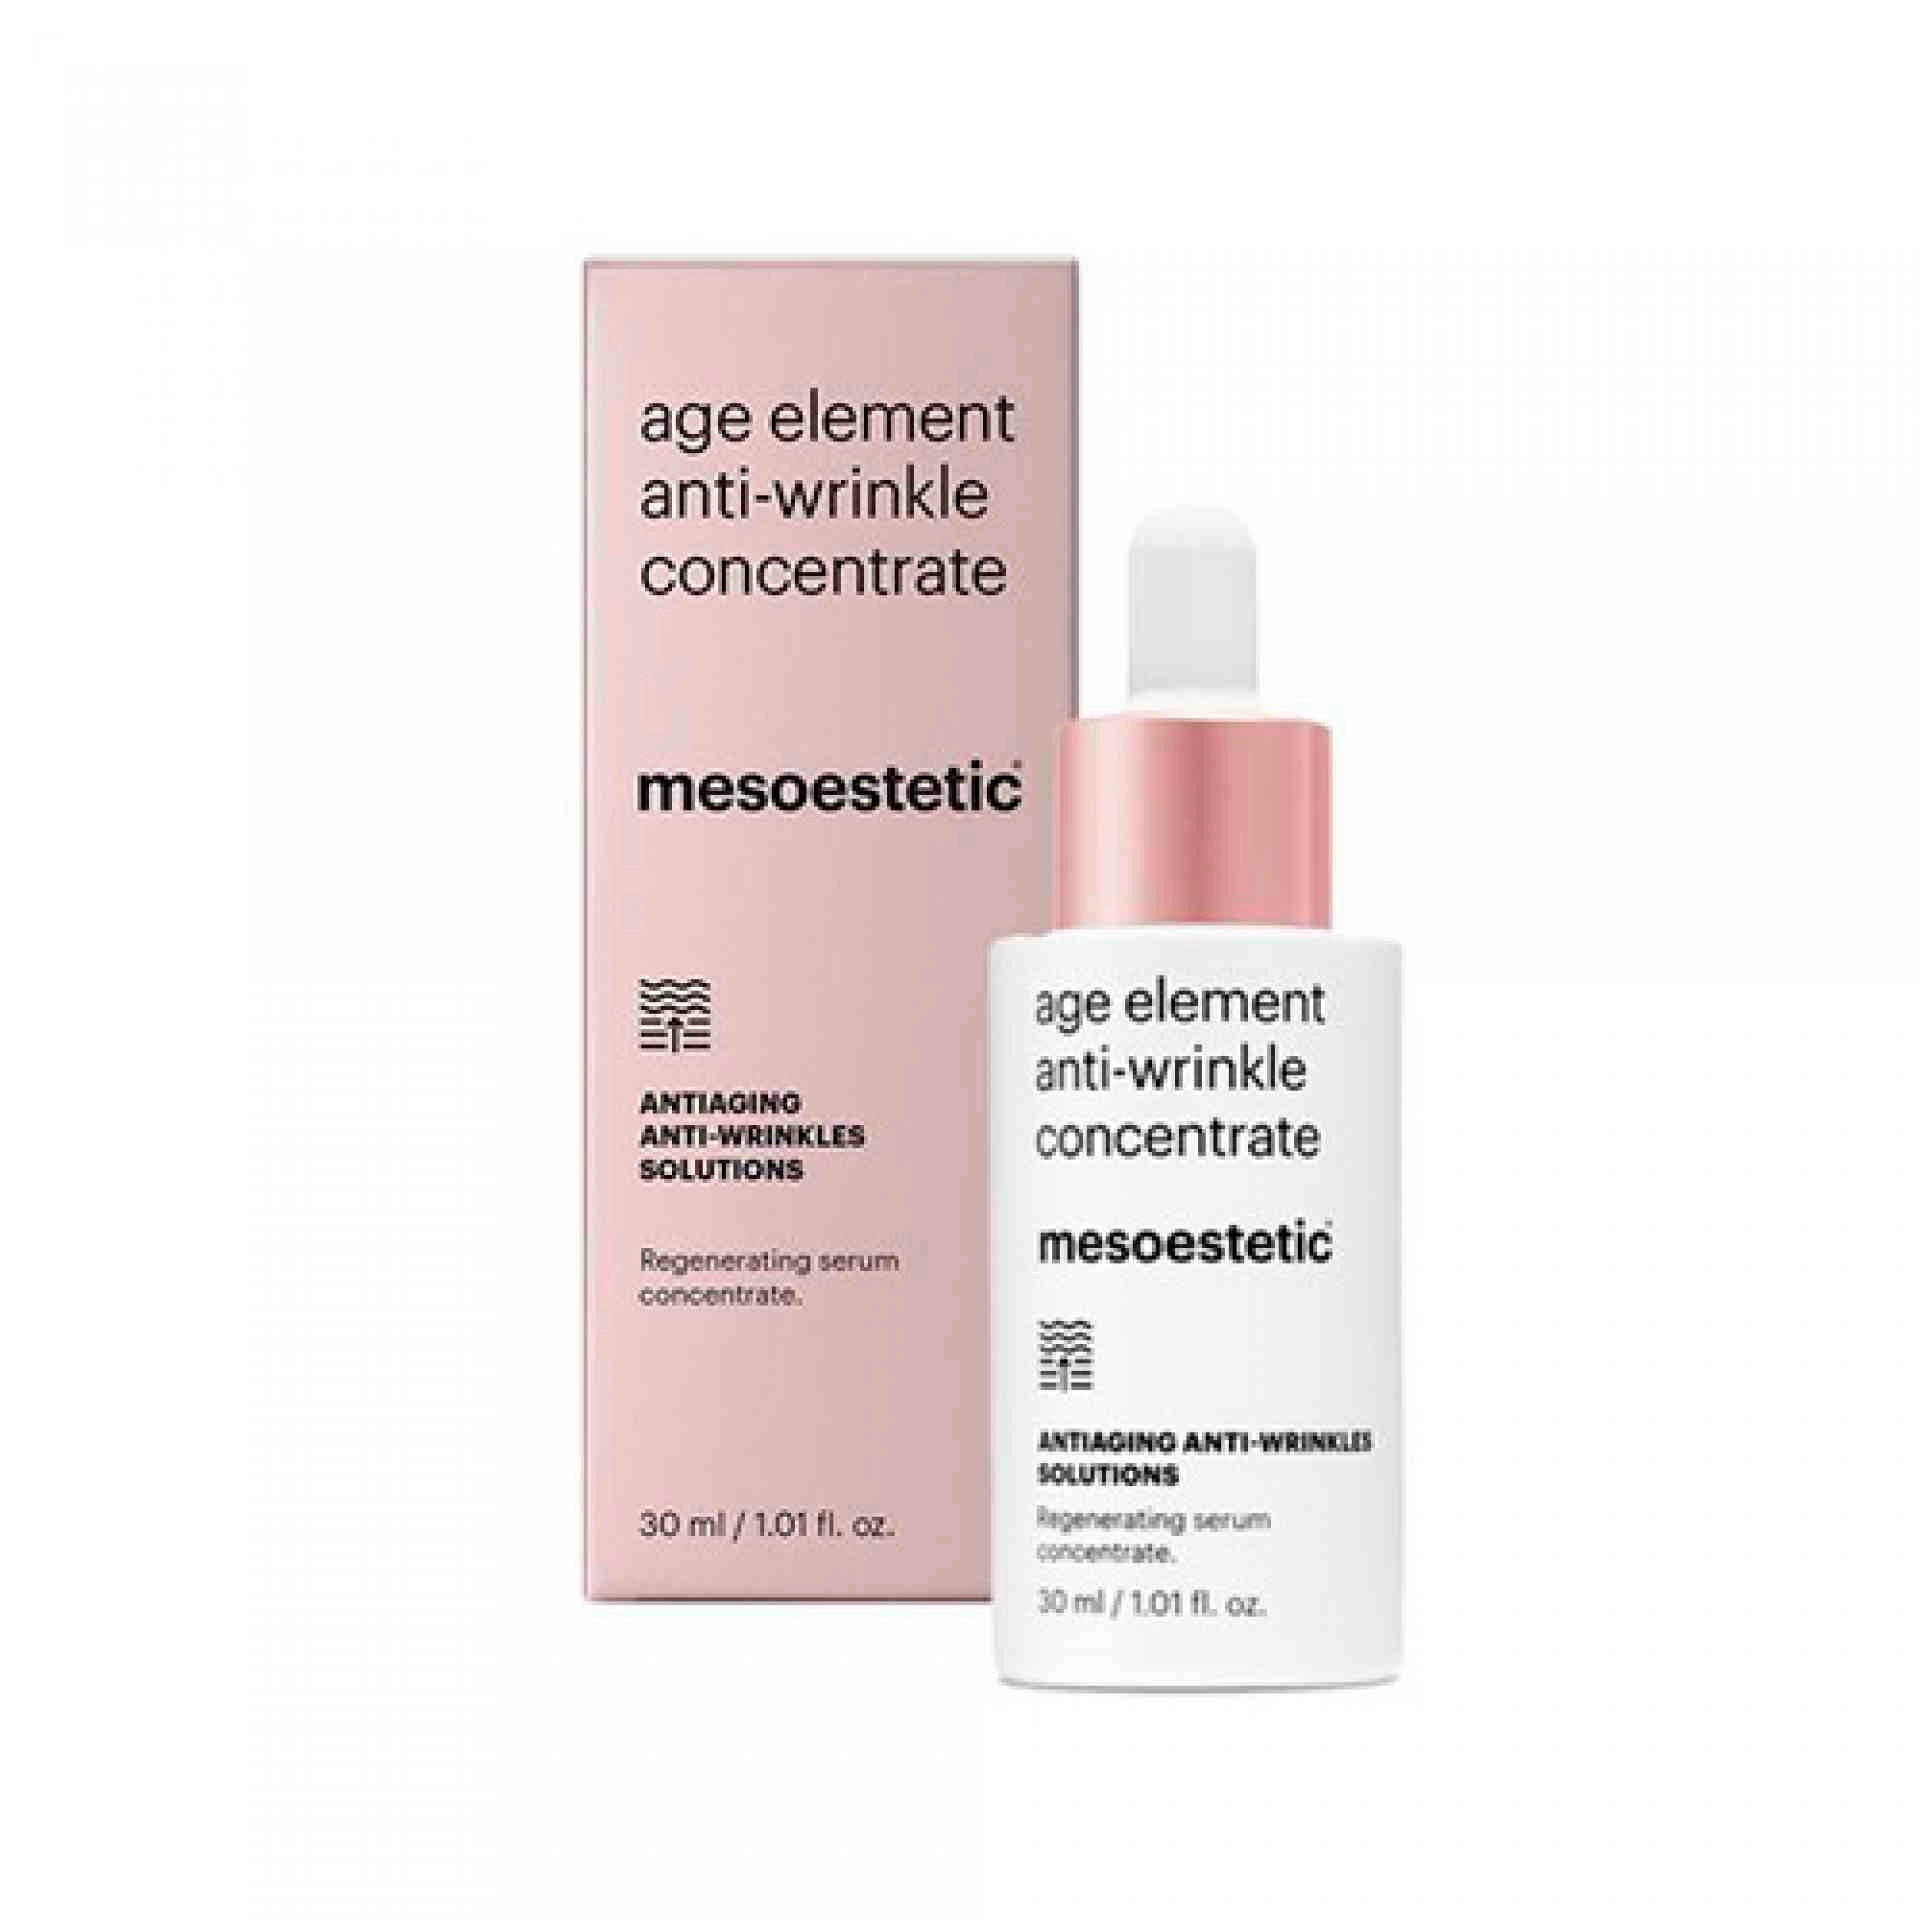 age element anti-wrinkle concentrate | sérum 30ml - antiaging antiwrinkles solutions - mesoestetic ®